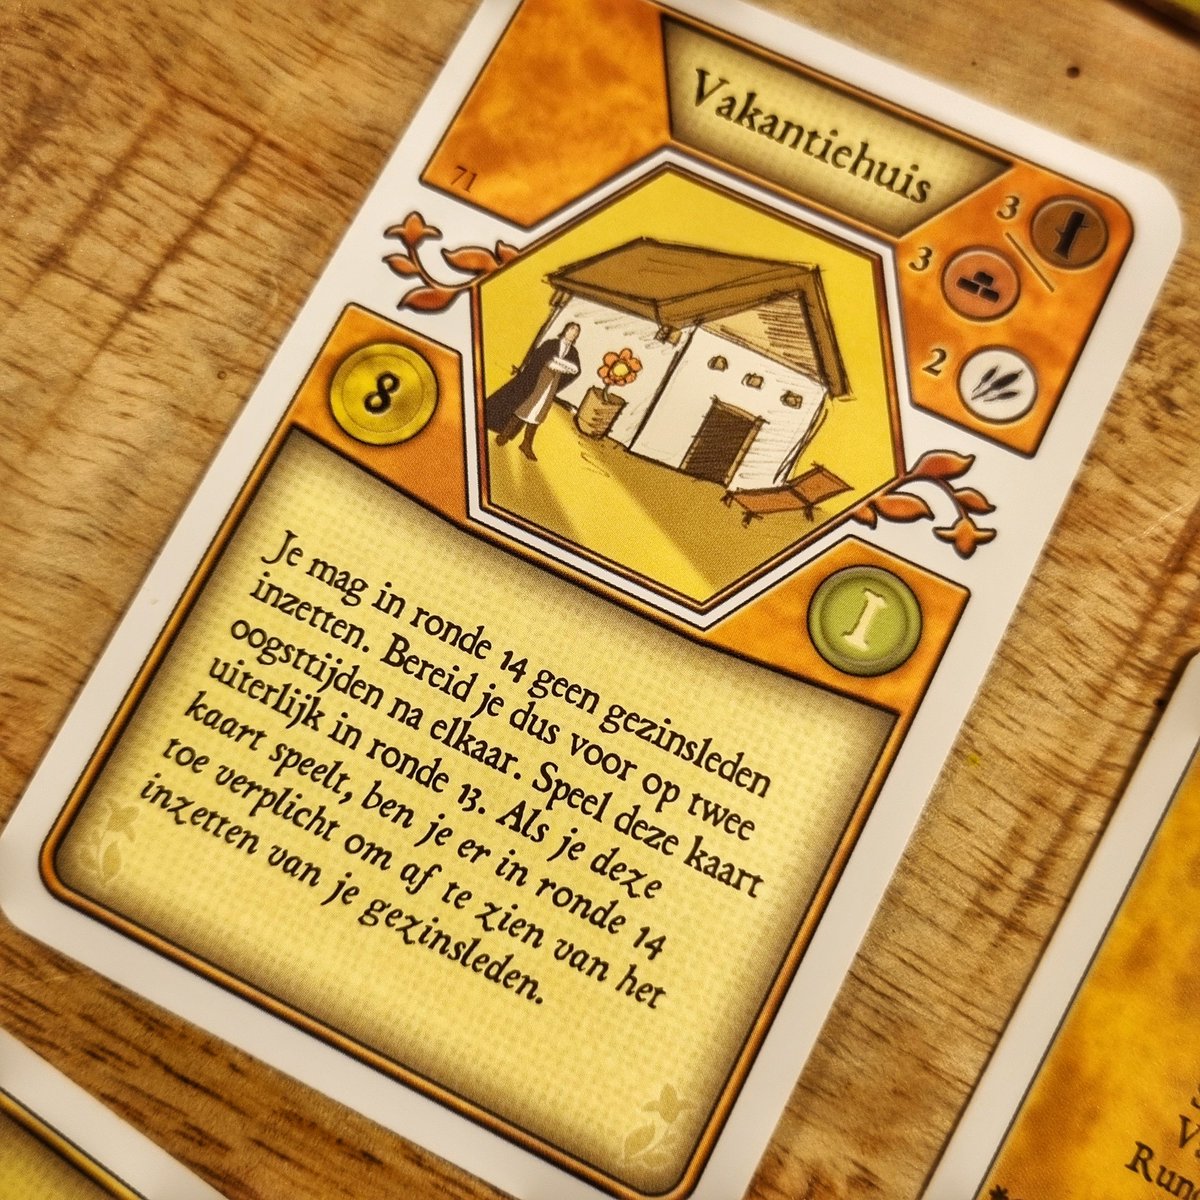 I'm delighted I've played the holiday house card in #Agricola. Nothing says 'come at me bro' like forfeiting the last round! 😂 (English rules in the alt text)